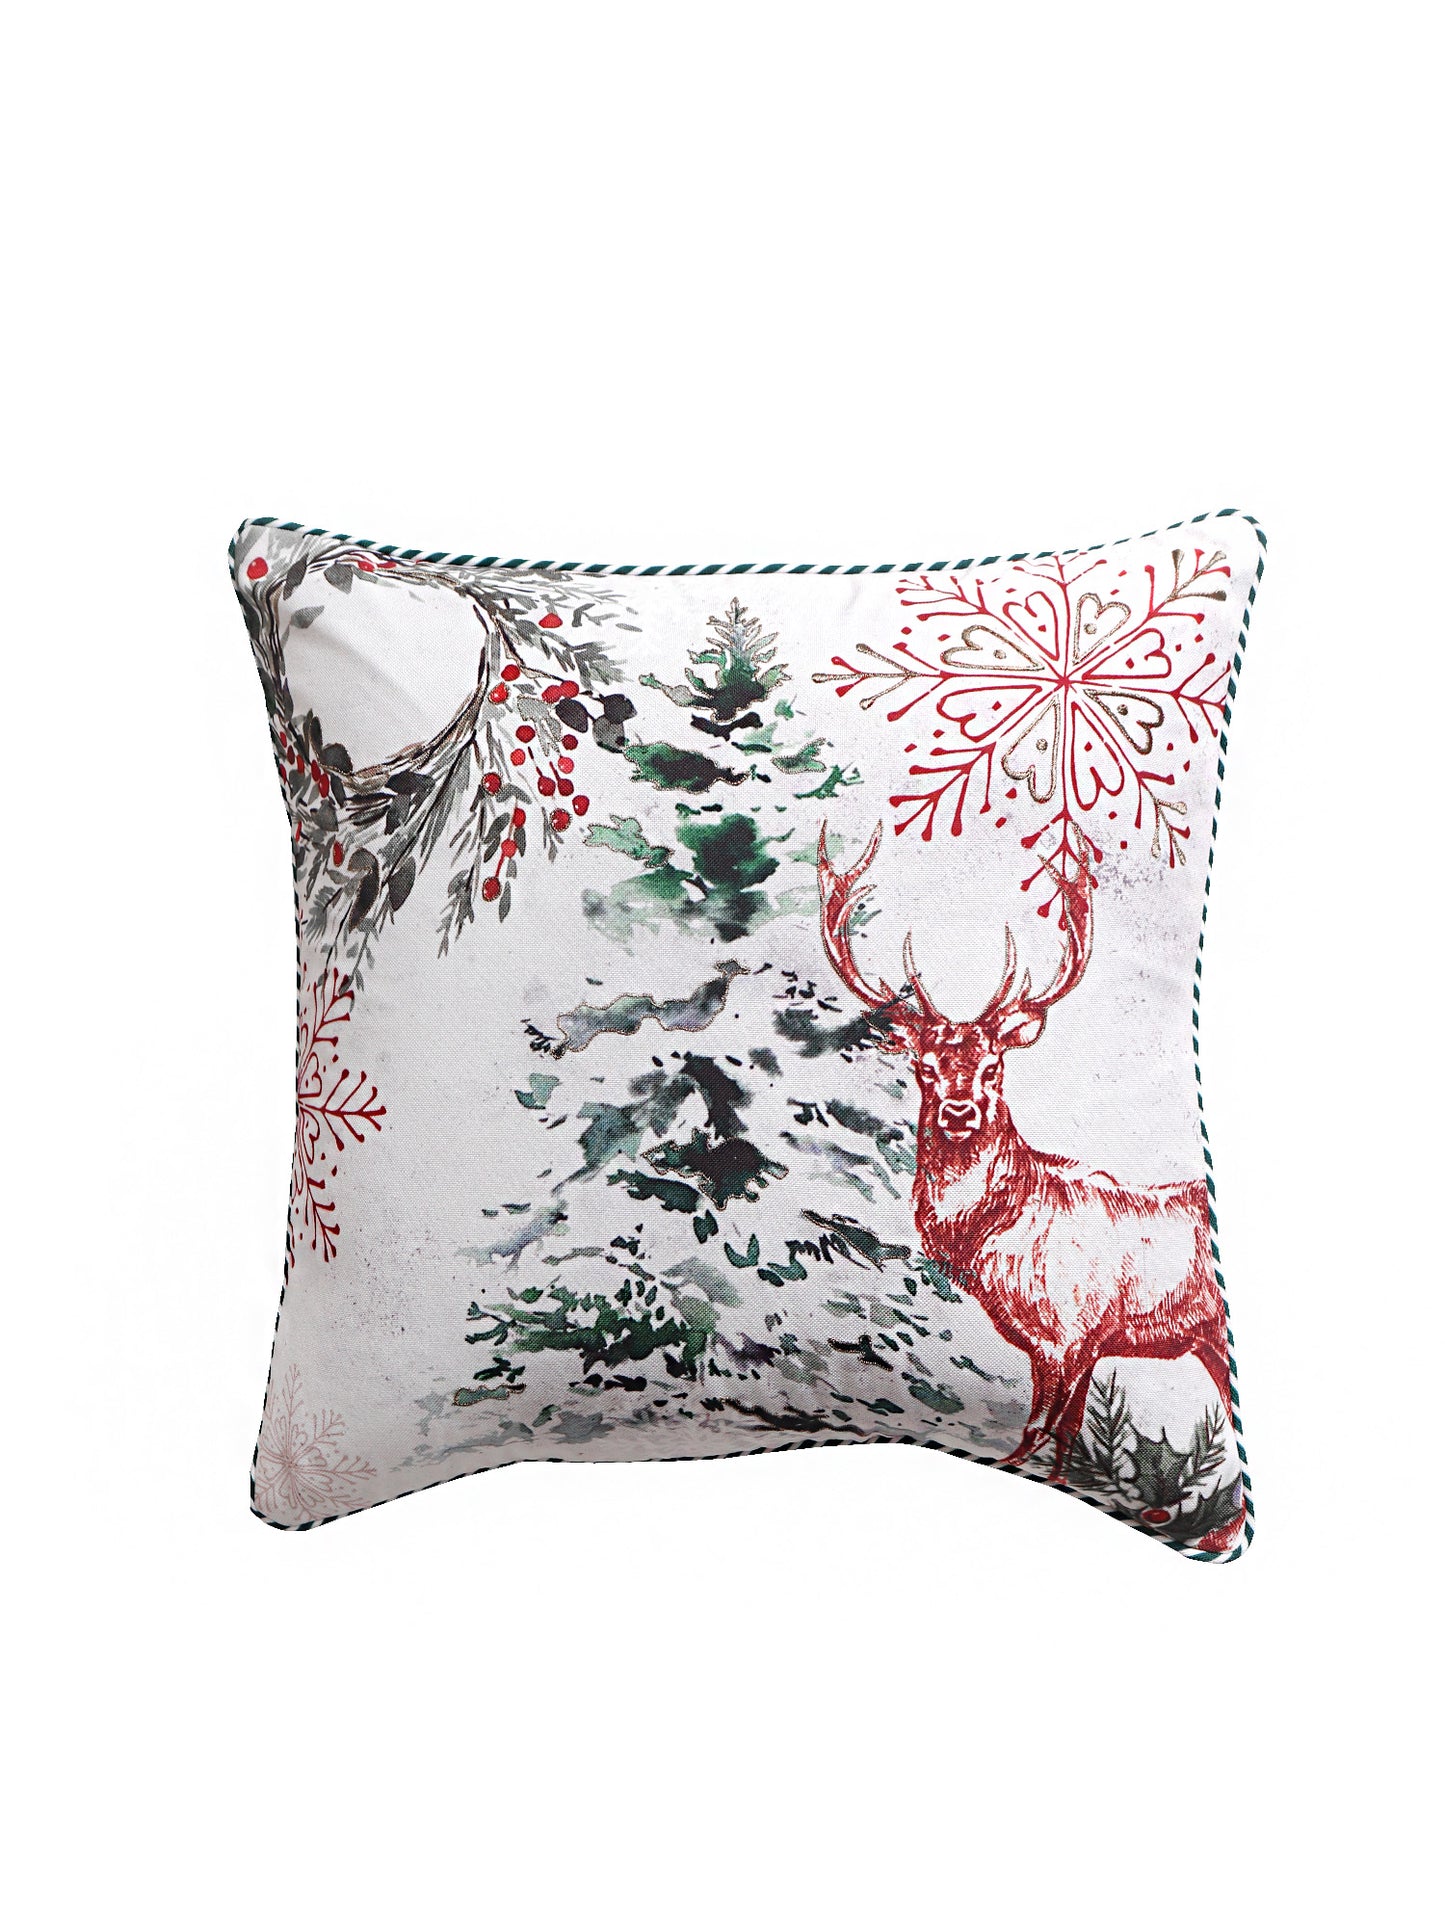 Printed Reindeer Cushion Cover with Antique Gold Embroidery and Cord Piping Cotton Blend Multi - 16" x 16"